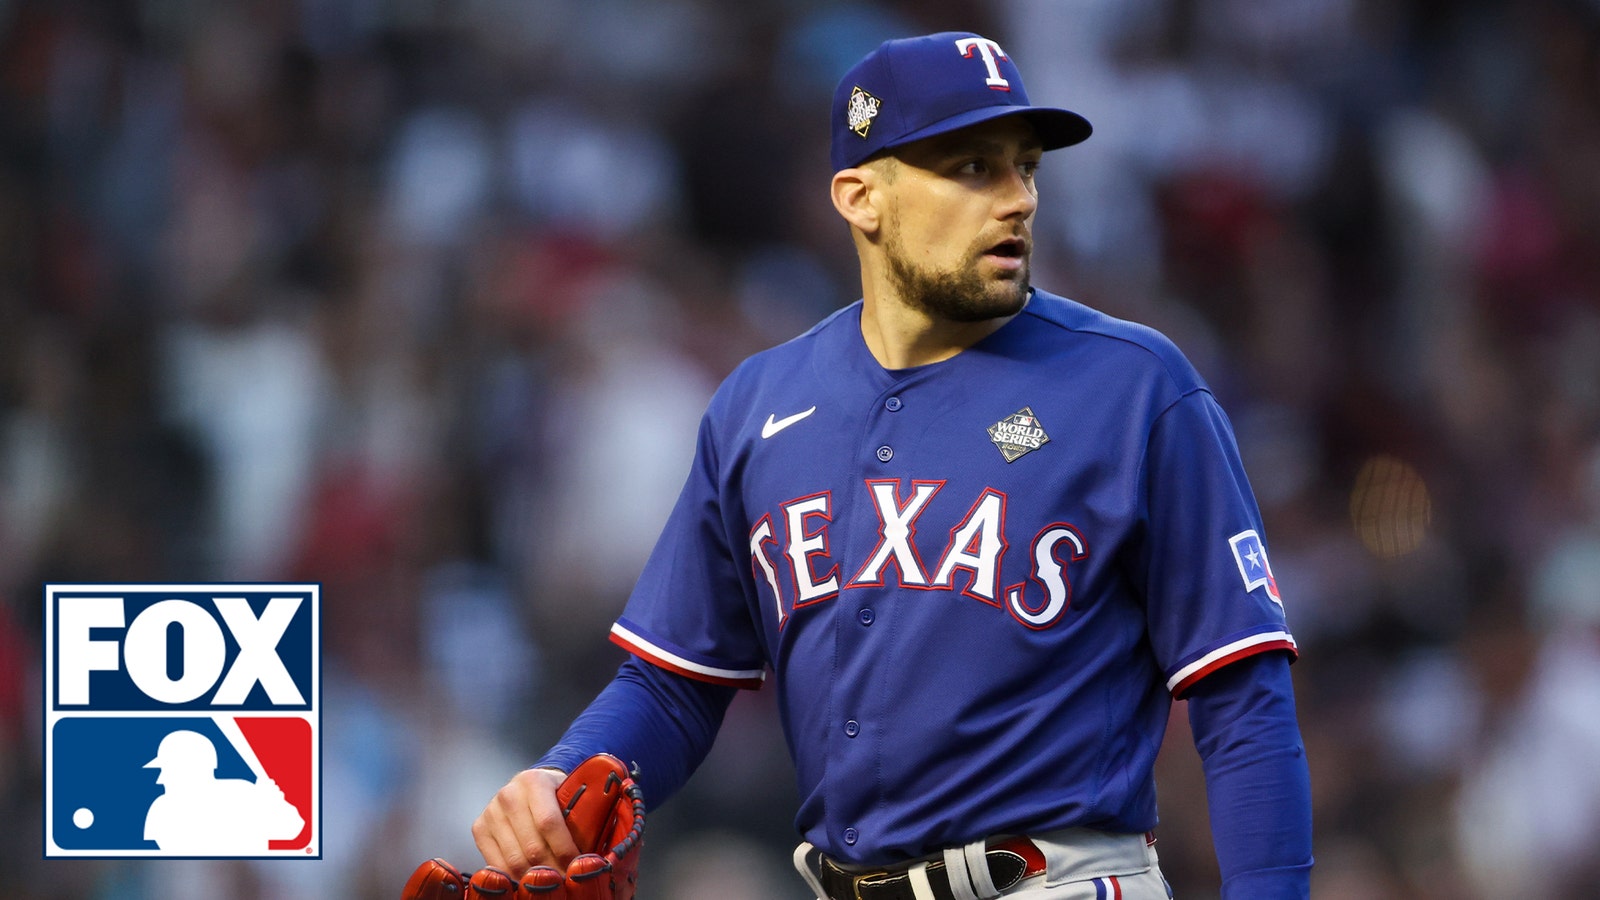 Rangers' Nathan Eovaldi gets Tommy Pham to ground out, leaving two Diamondbacks stranded in the third